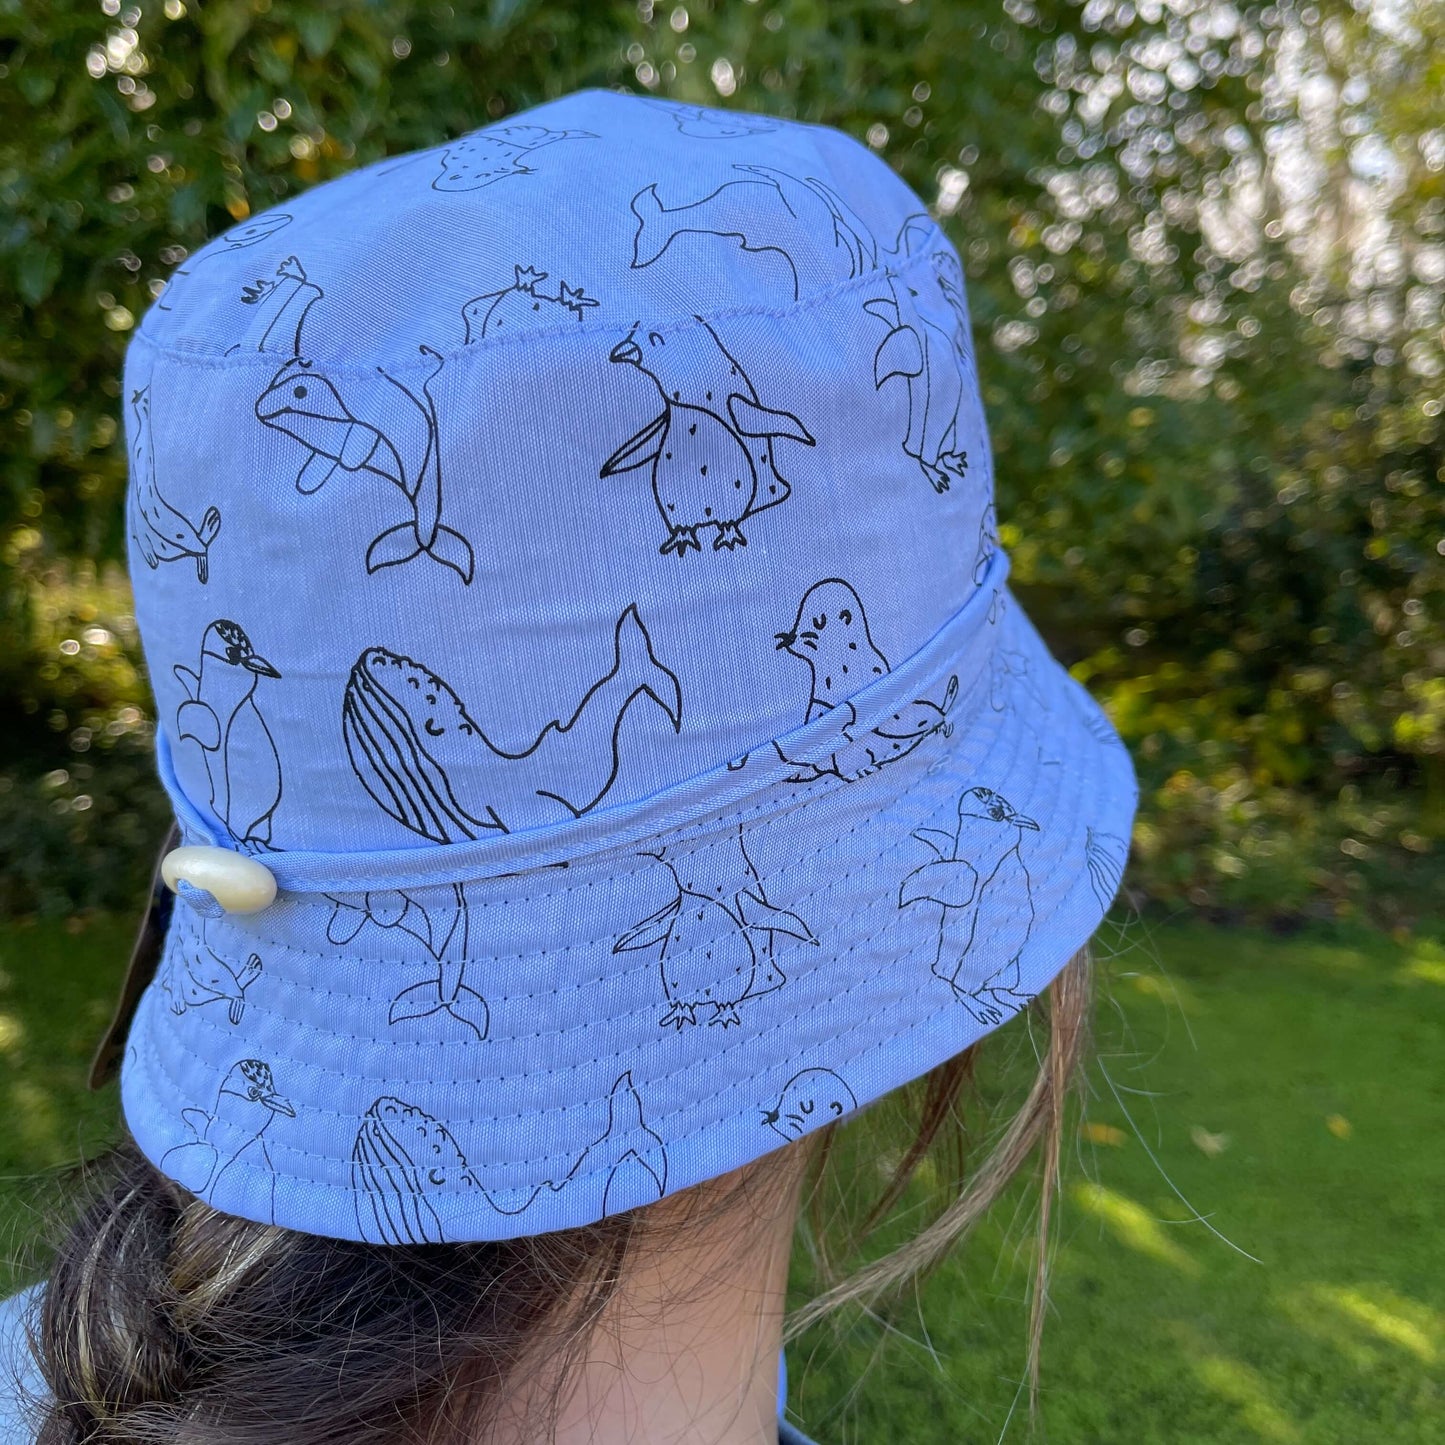 Girl wearing a bucket hat in denim blue with animal outlines in black.